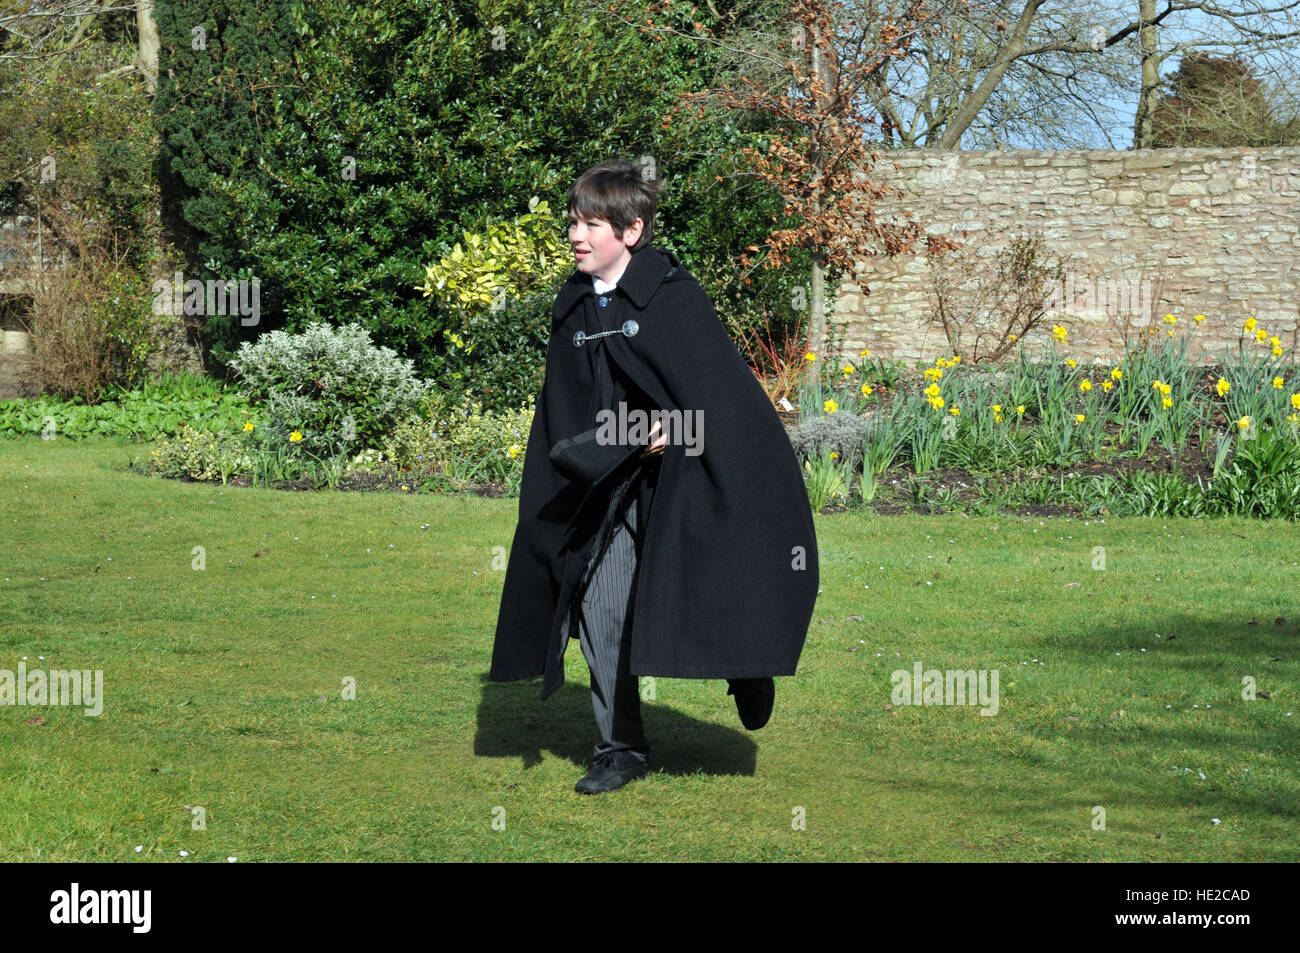 Choristers from Wells Cathedral Choir taking part in Easter egg hunt after the end of Easter chorister duties. Stock Photo